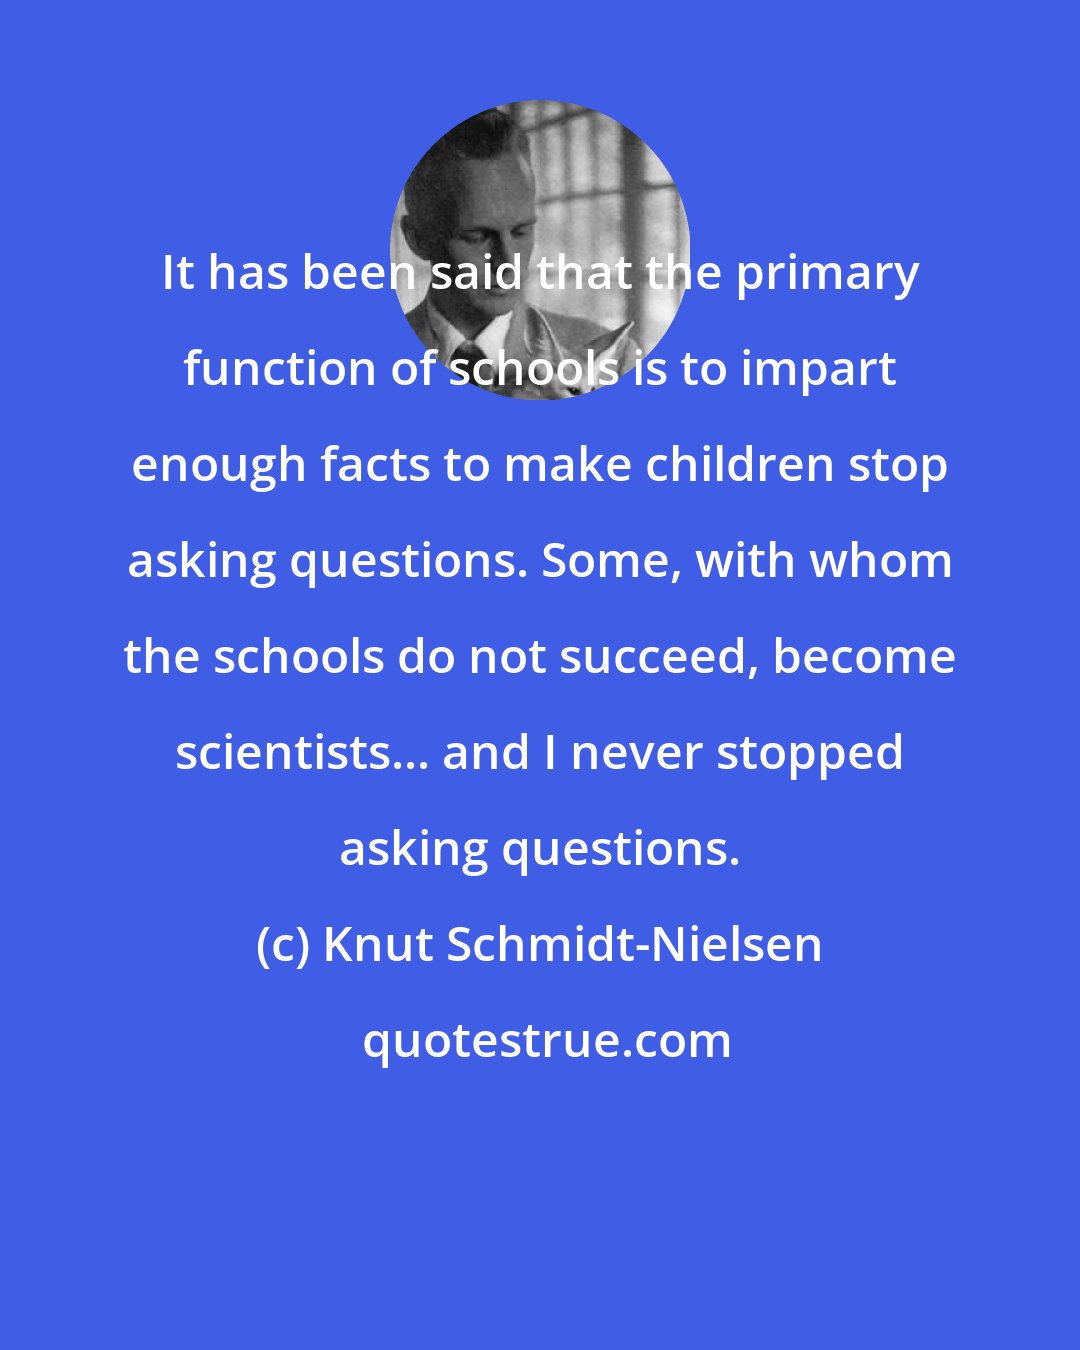 Knut Schmidt-Nielsen: It has been said that the primary function of schools is to impart enough facts to make children stop asking questions. Some, with whom the schools do not succeed, become scientists... and I never stopped asking questions.